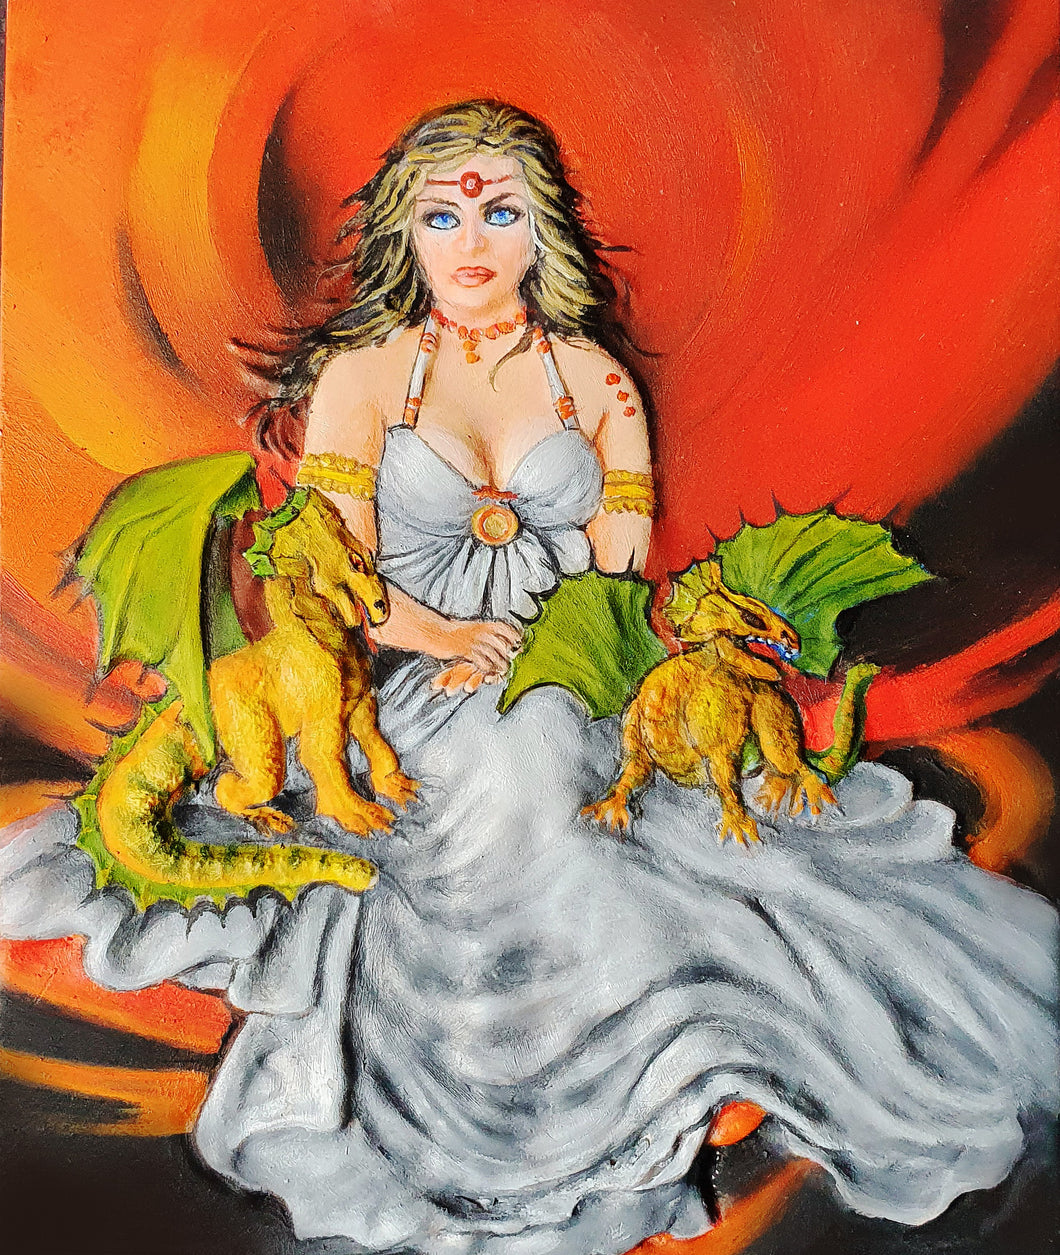 Signora dei draghi/Queen of the dragons